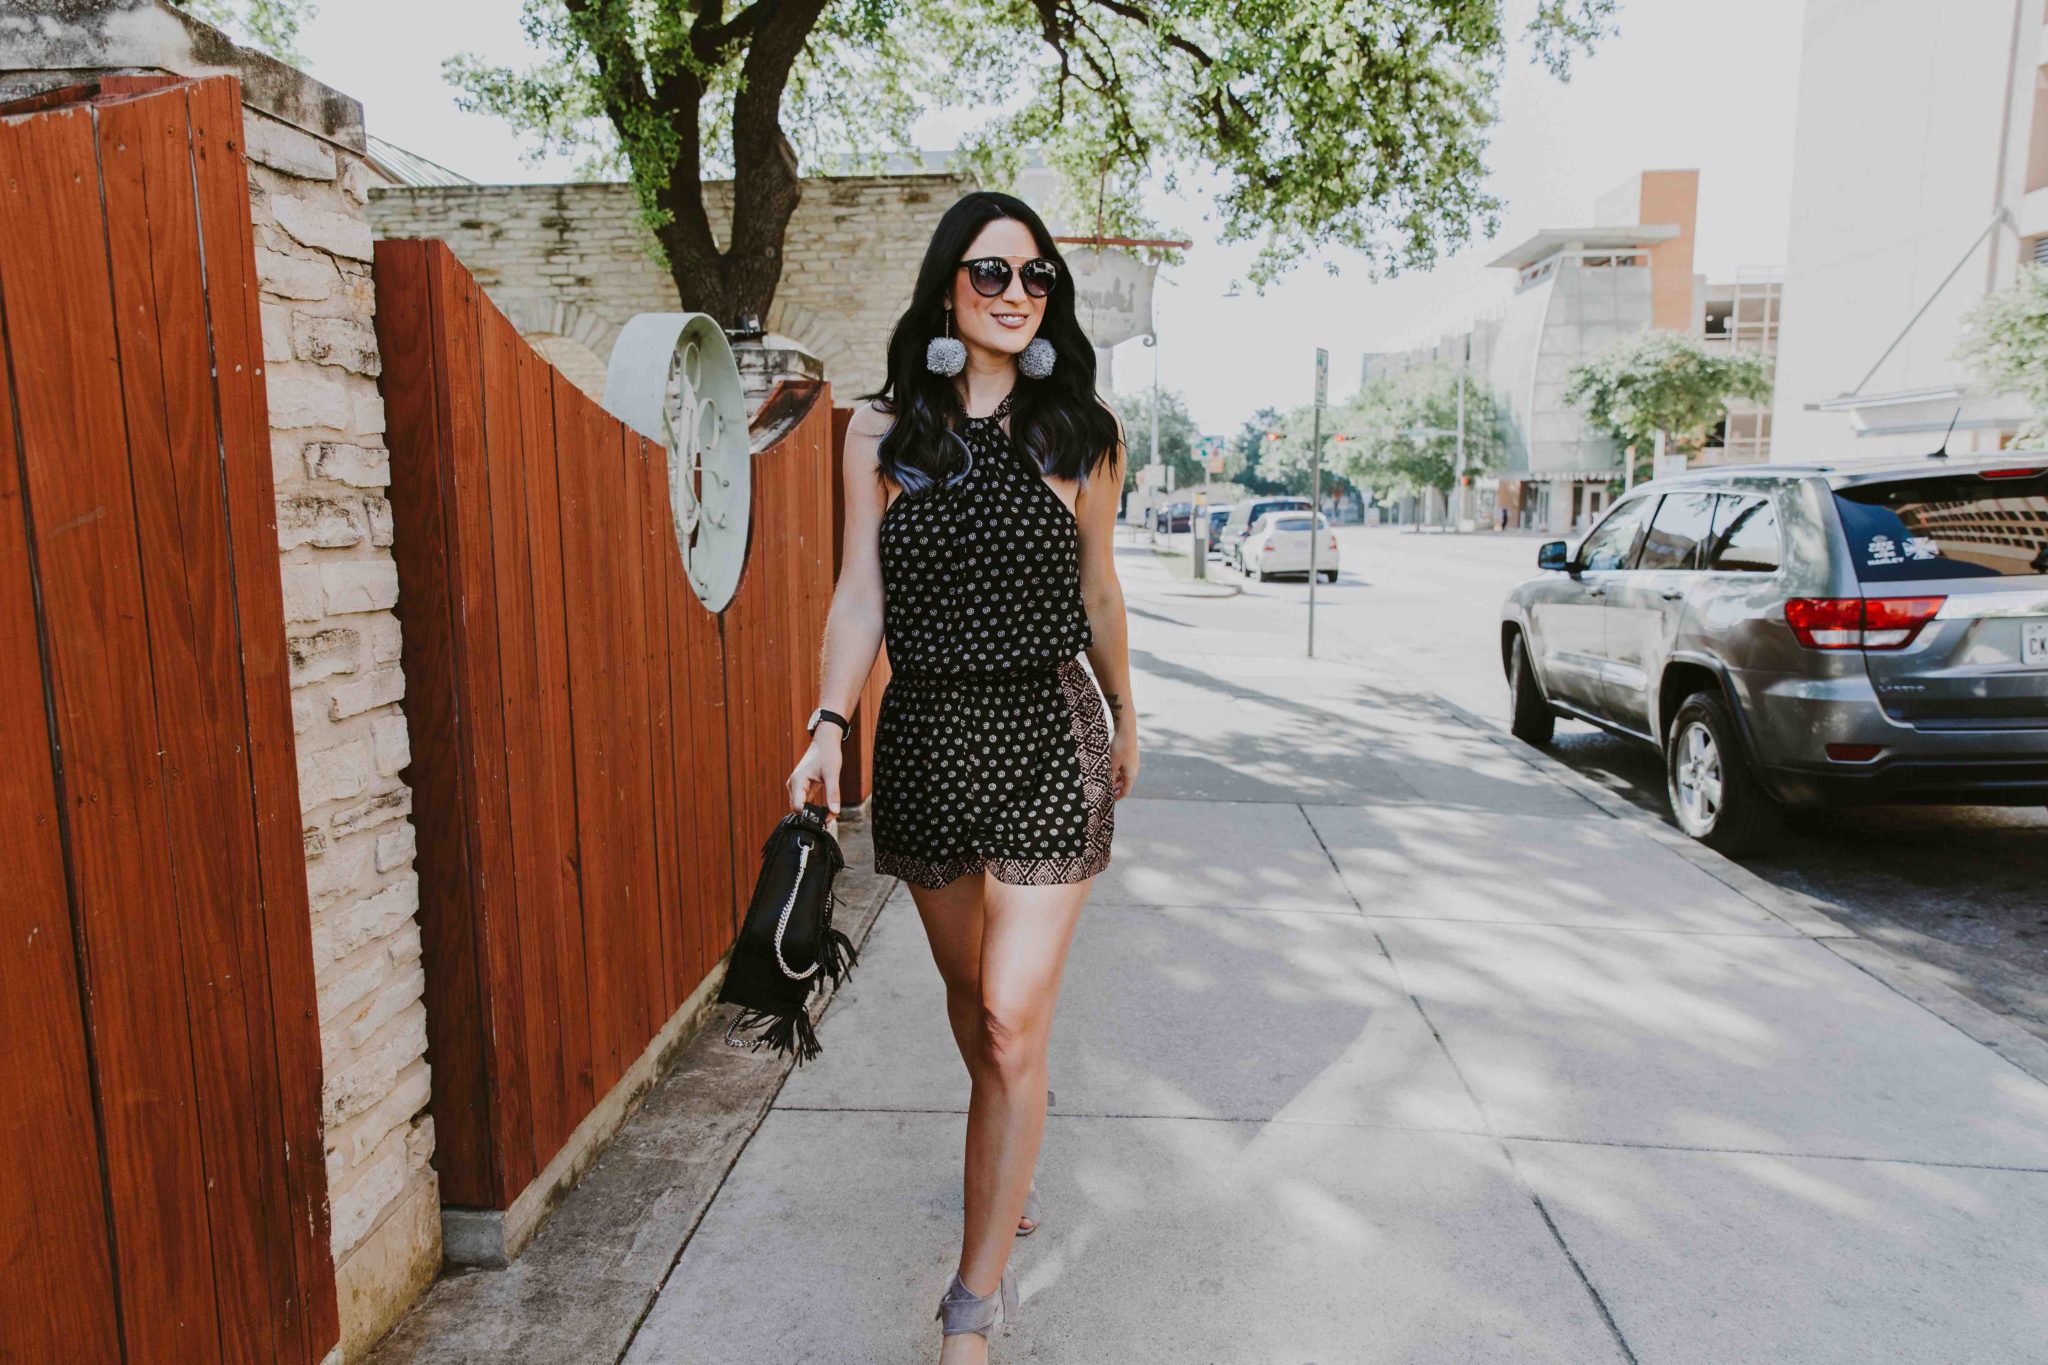 DTKAustin shares her favorite detailed romper and shoes from Splendid plus a gorgeous black leather bag from Rebecca Minkoff. Click for more information and photos. | Black Summer Romper | how to style a romper | how to wear a romper | summer fashion tips | summer outfit ideas | summer style tips | what to wear for summer | warm weather fashion | fashion for summer | style tips for summer | outfit ideas for summer || Dressed to Kill